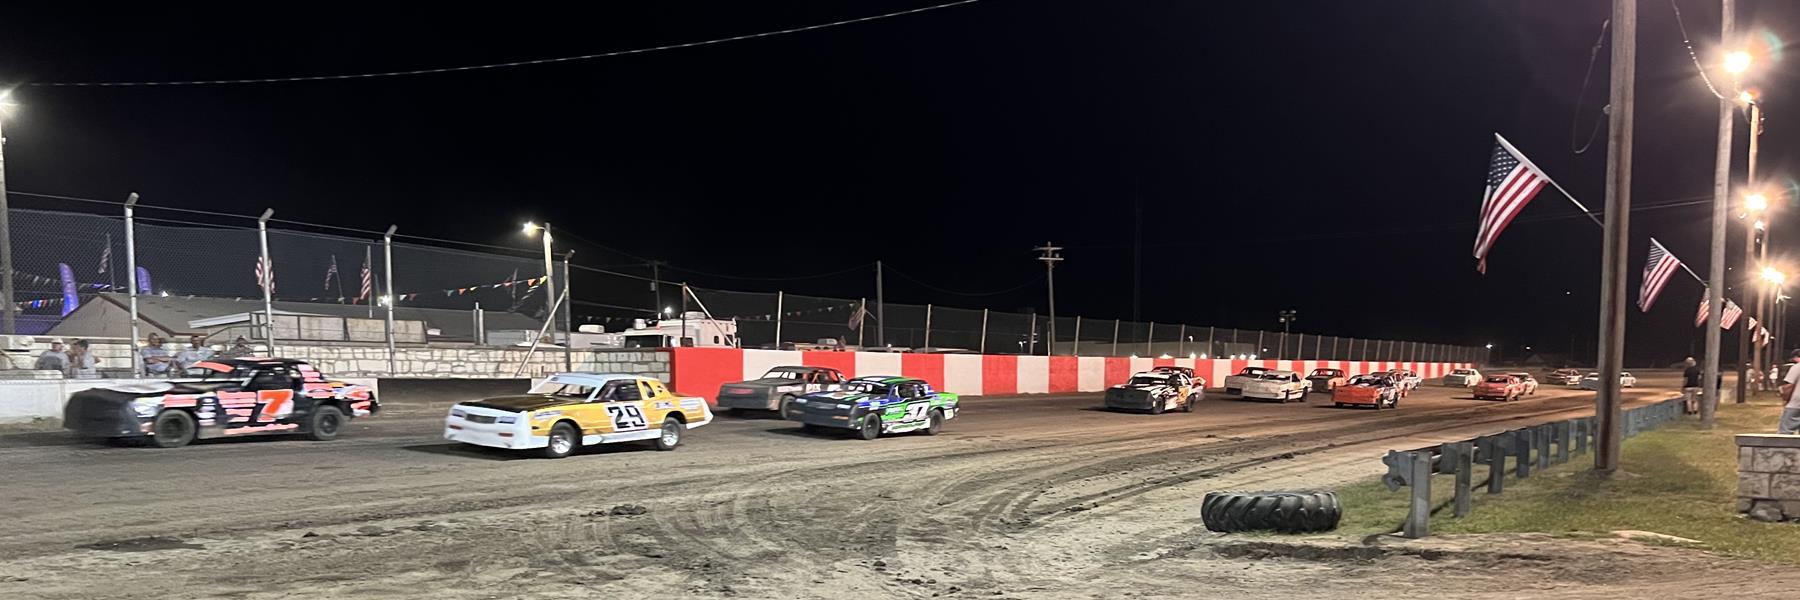 8/18/2017 - Rooks County Speedway